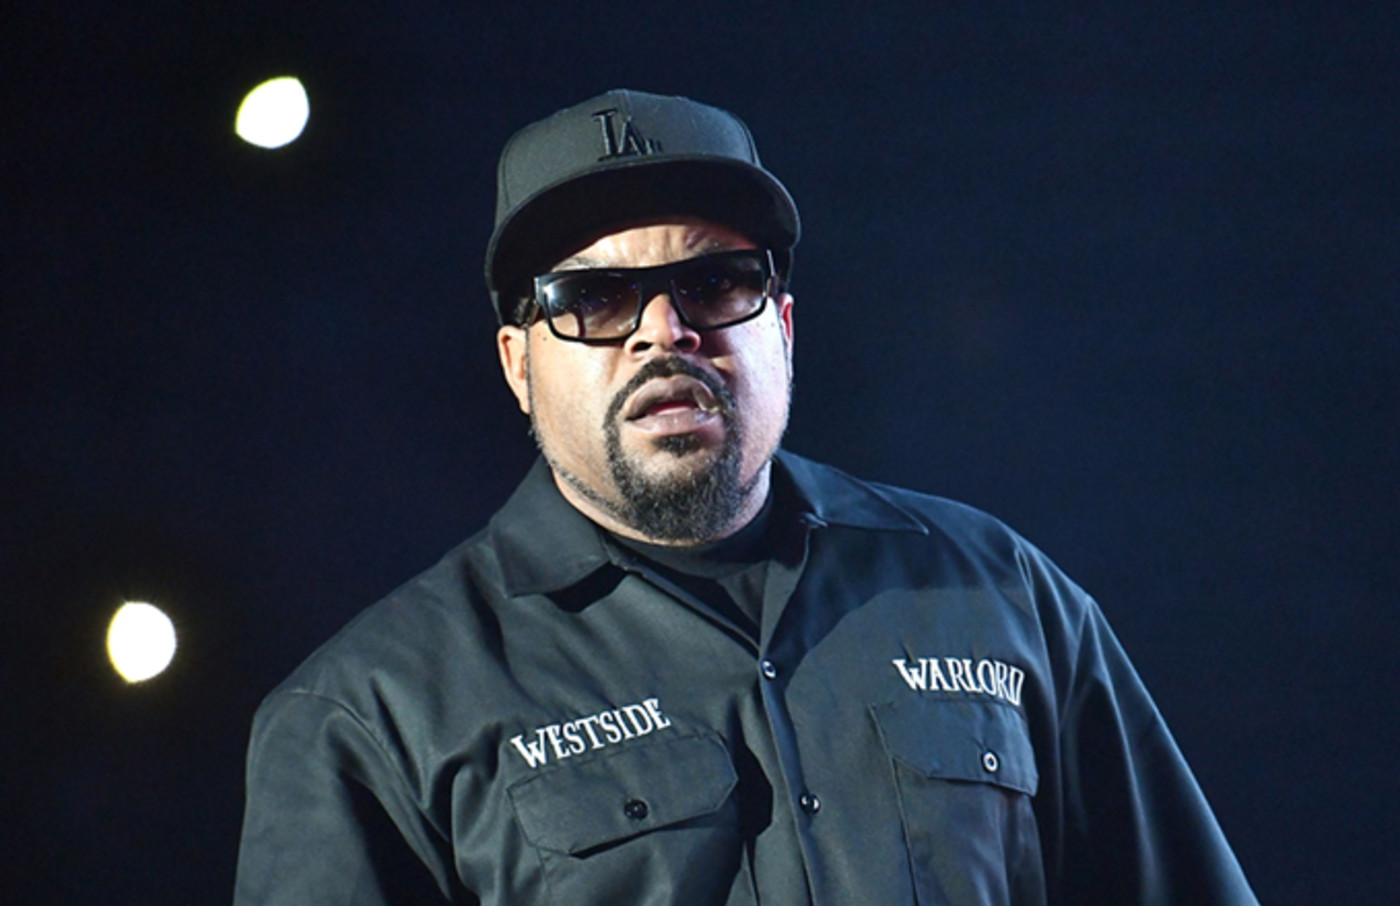 Ice Cube Eminem. Ice Cube Diss. Ice Cube n.w.a. Ice Cube младший. Ice cube you know